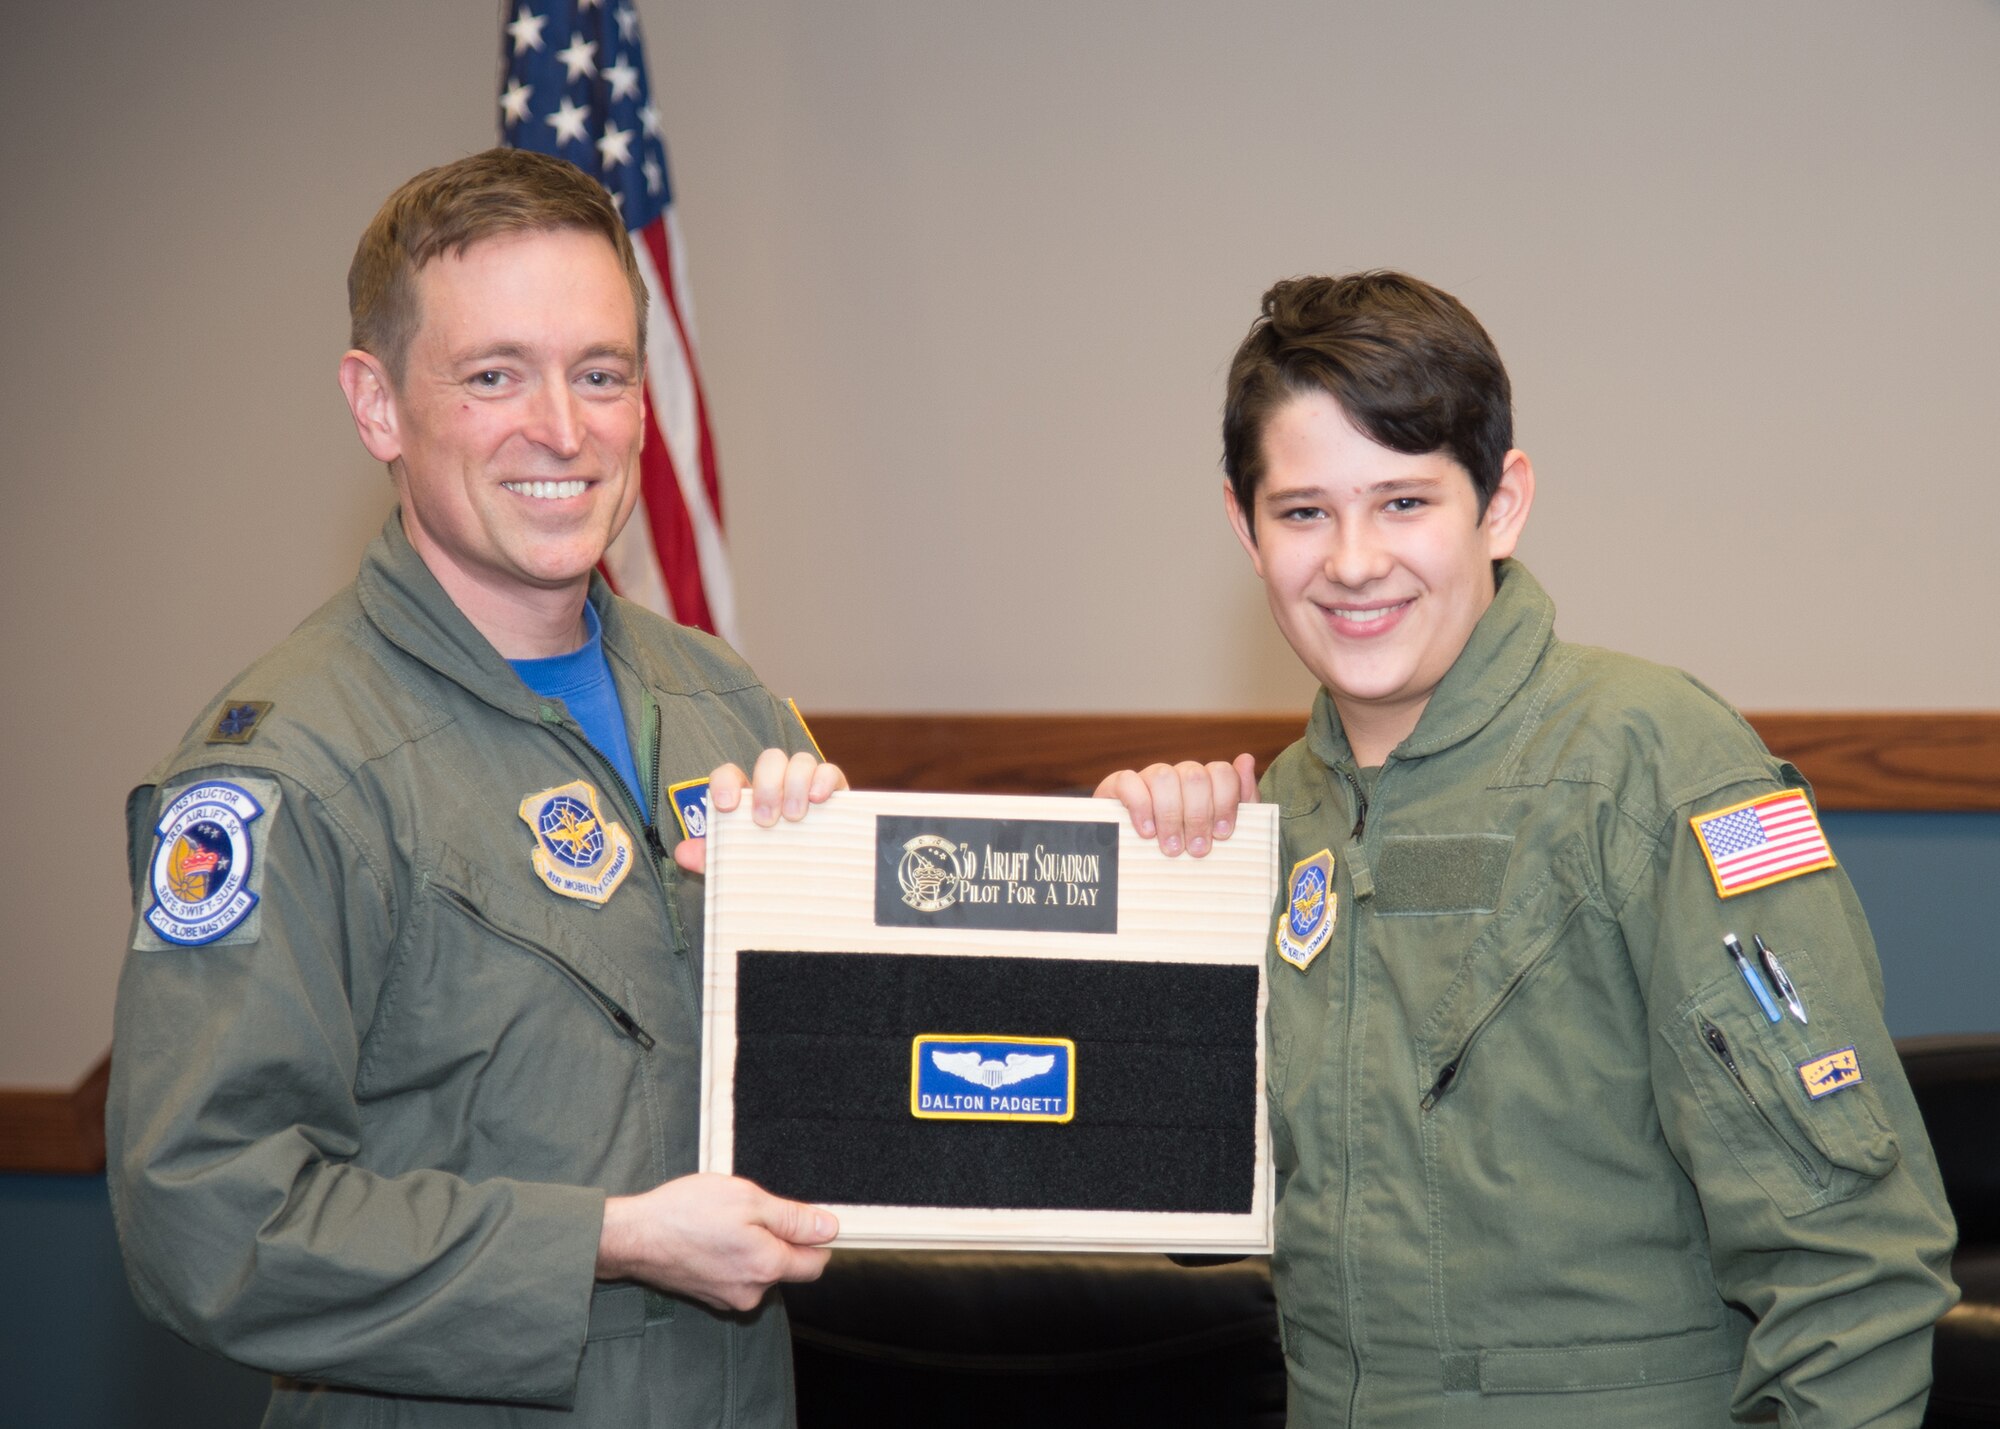 Dalton Padgett and Lt. Col. Mark Radio, 3rd Airlift Squadron commander, conclude the Pilot for a Day tour with a patching ceremony Mar. 3, 2017, at Dover Air Force Base, Del. It is an Air Force tradition for pilots to leave their name patch at the squadron when their tour of duty comes to an end. (U.S. Air Force photo by Mauricio Campino)